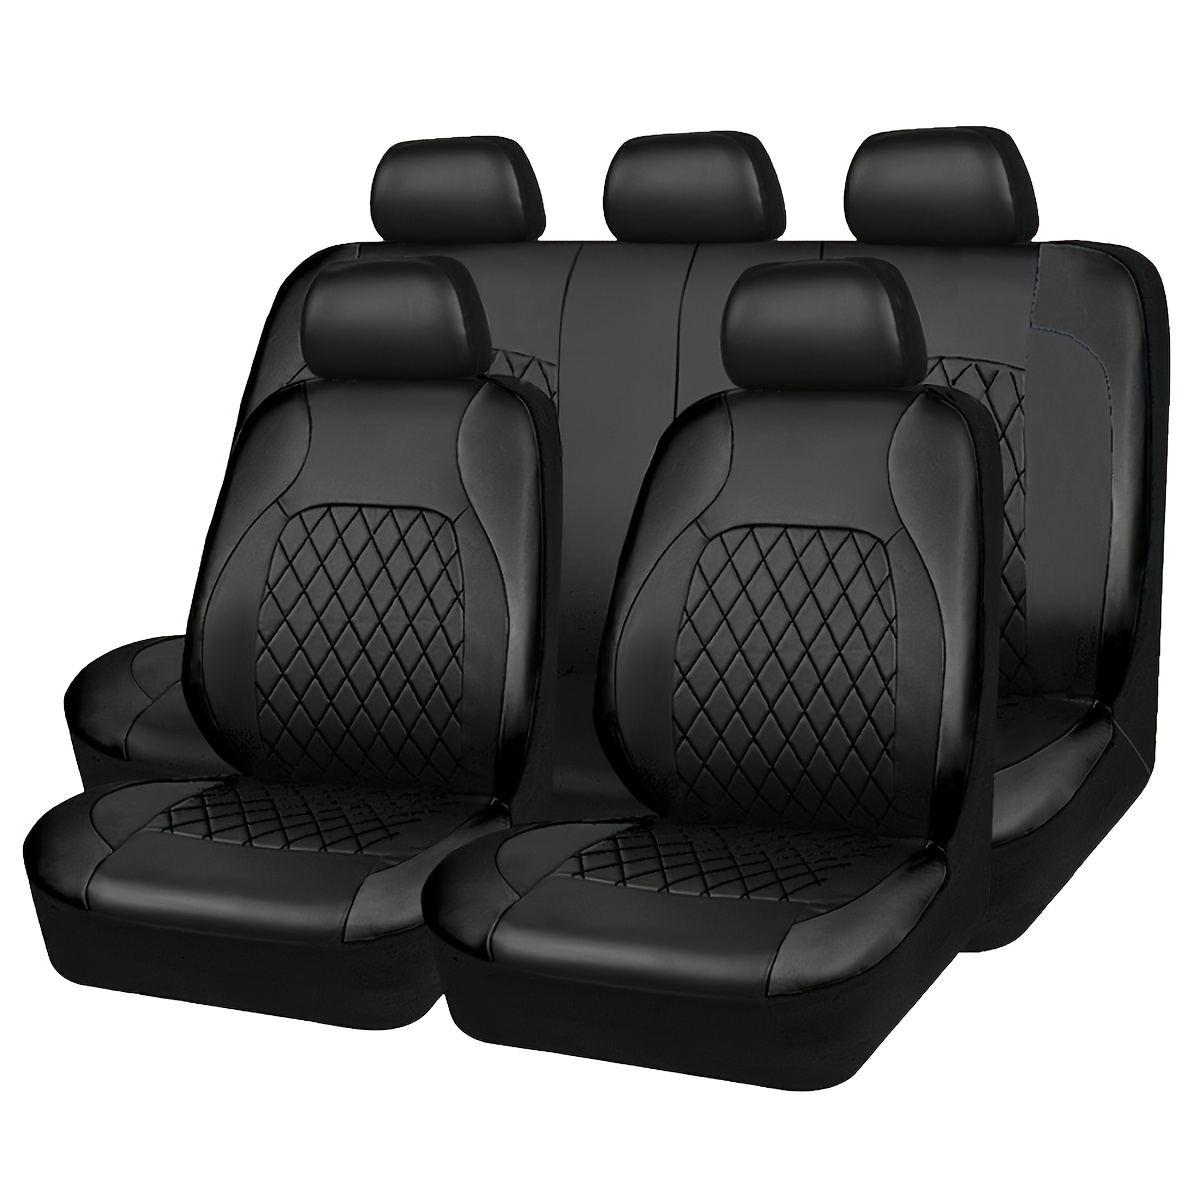 

All Season Pu Leather Universal Car Seat Cover Set Full Surrounded Cushion Protector Pad Anti-scratch Fit Sedan Suv Pick-up Seat